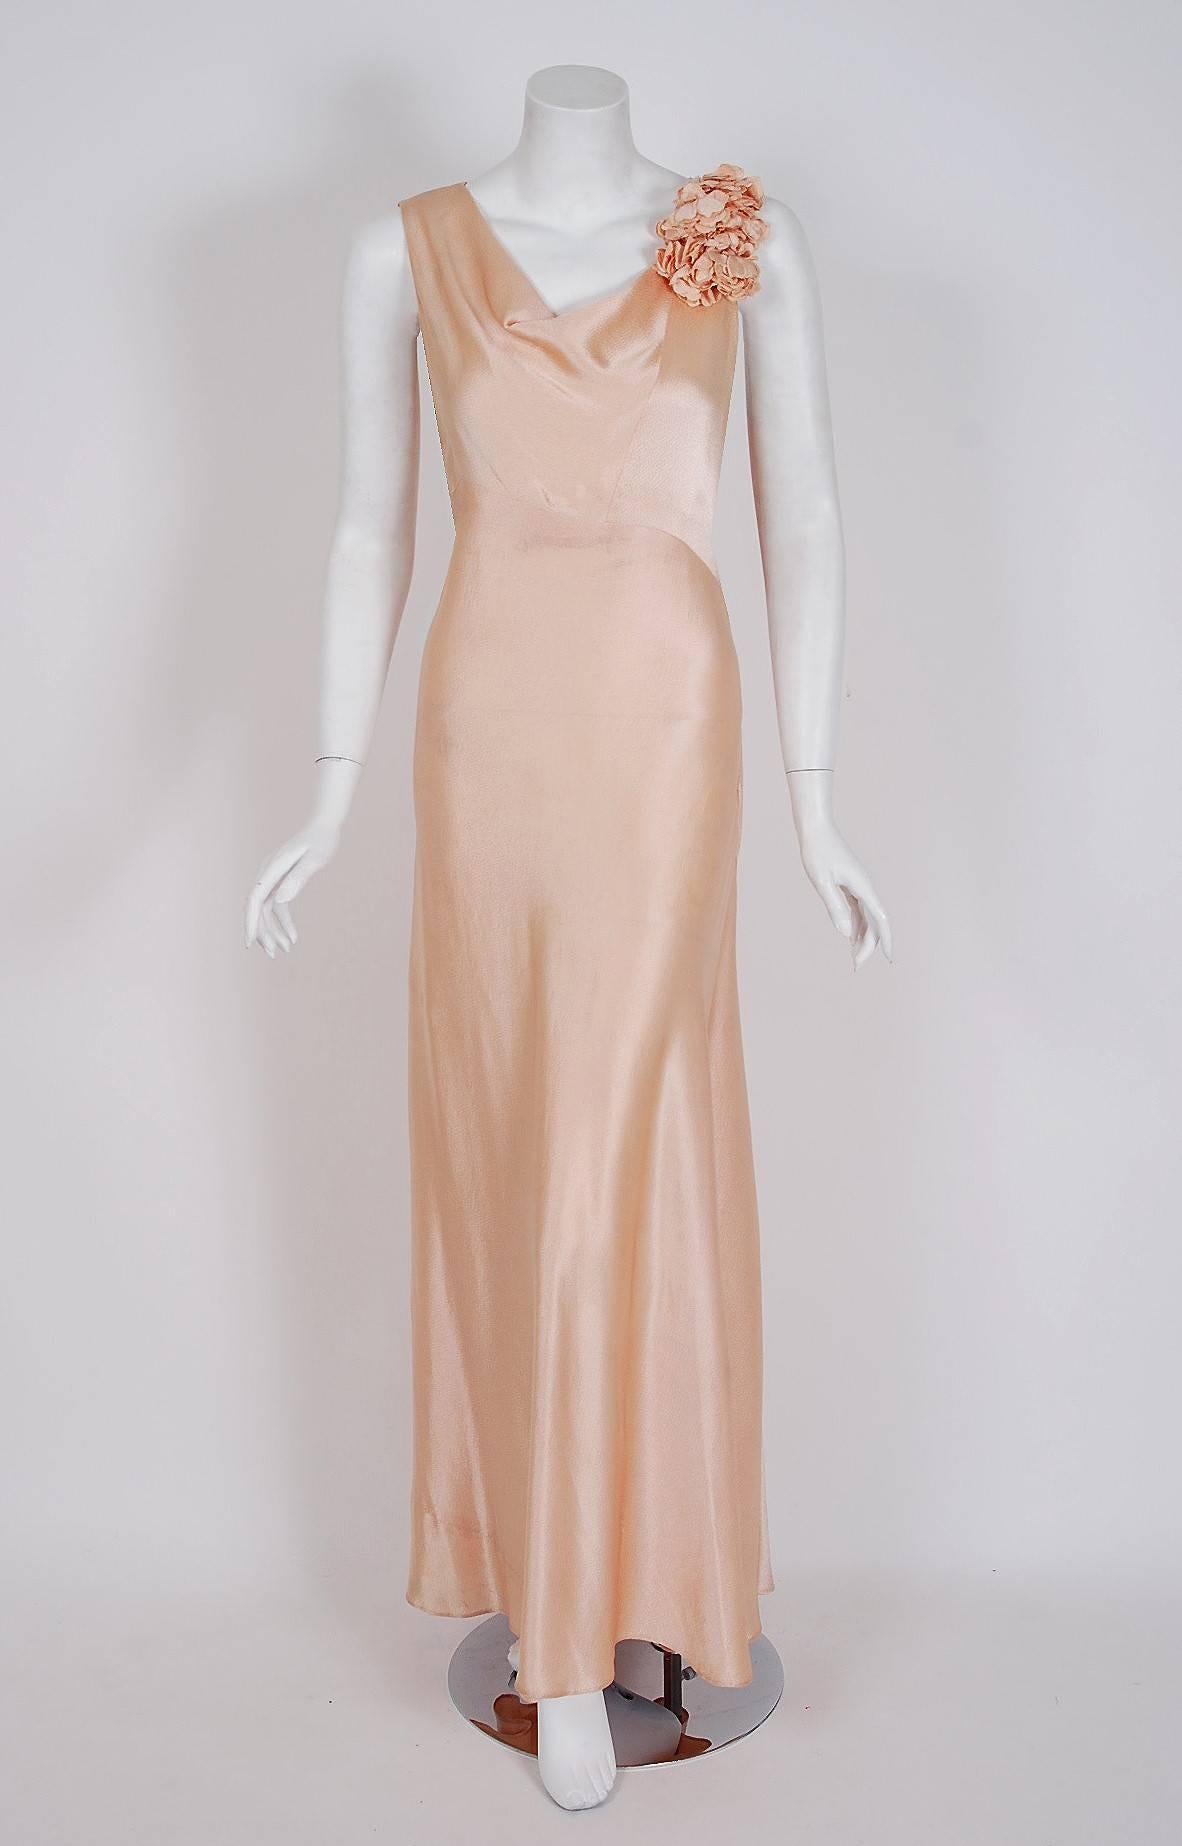 The breathtaking champagne-pink textured silk satin fabric used for this custom couture 1930's French dress ensemble has an ethereal quality that I find irresistible! The bodice has an elegant draped-cowl neckline and unique 3-dimensional floral